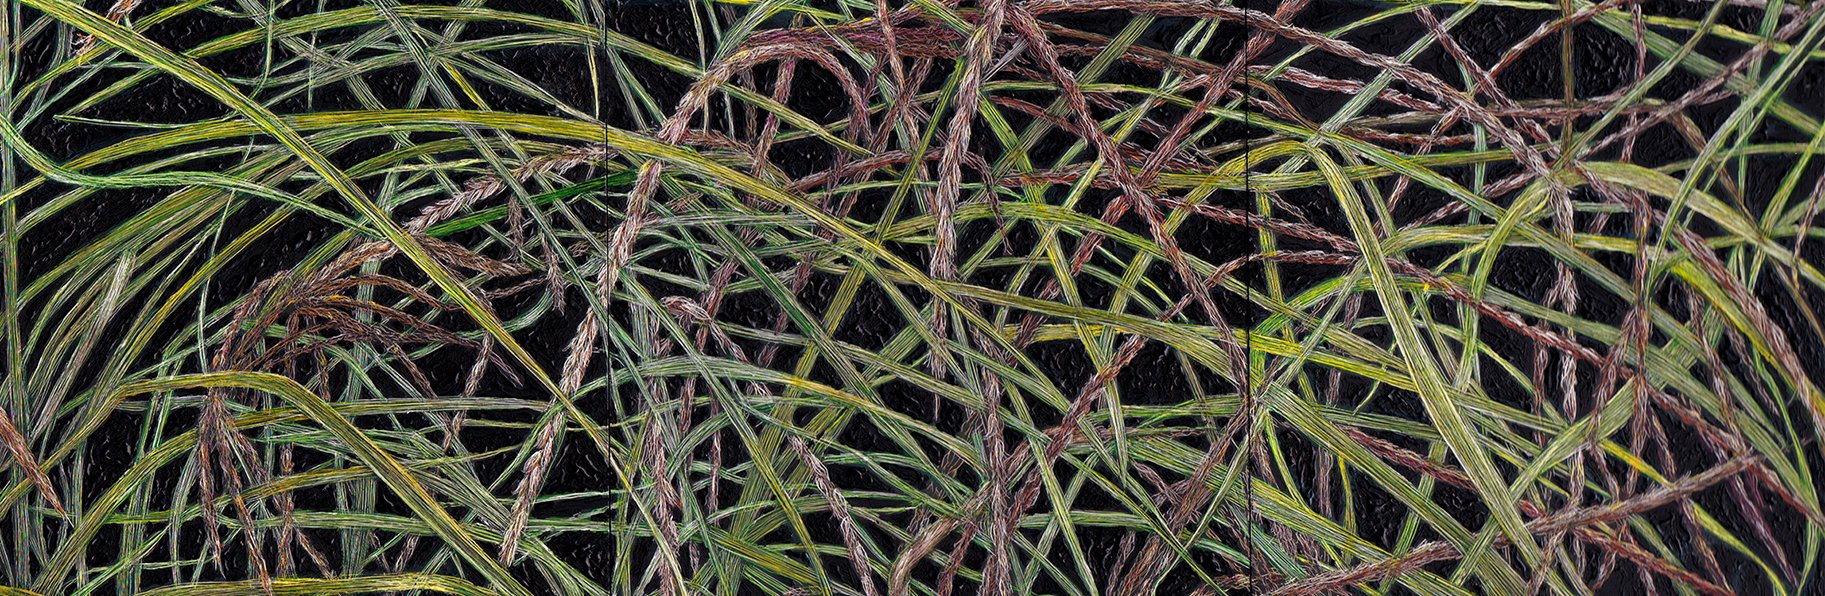 UNDER EARTH'S CANOPY: GRASSES DETAIL